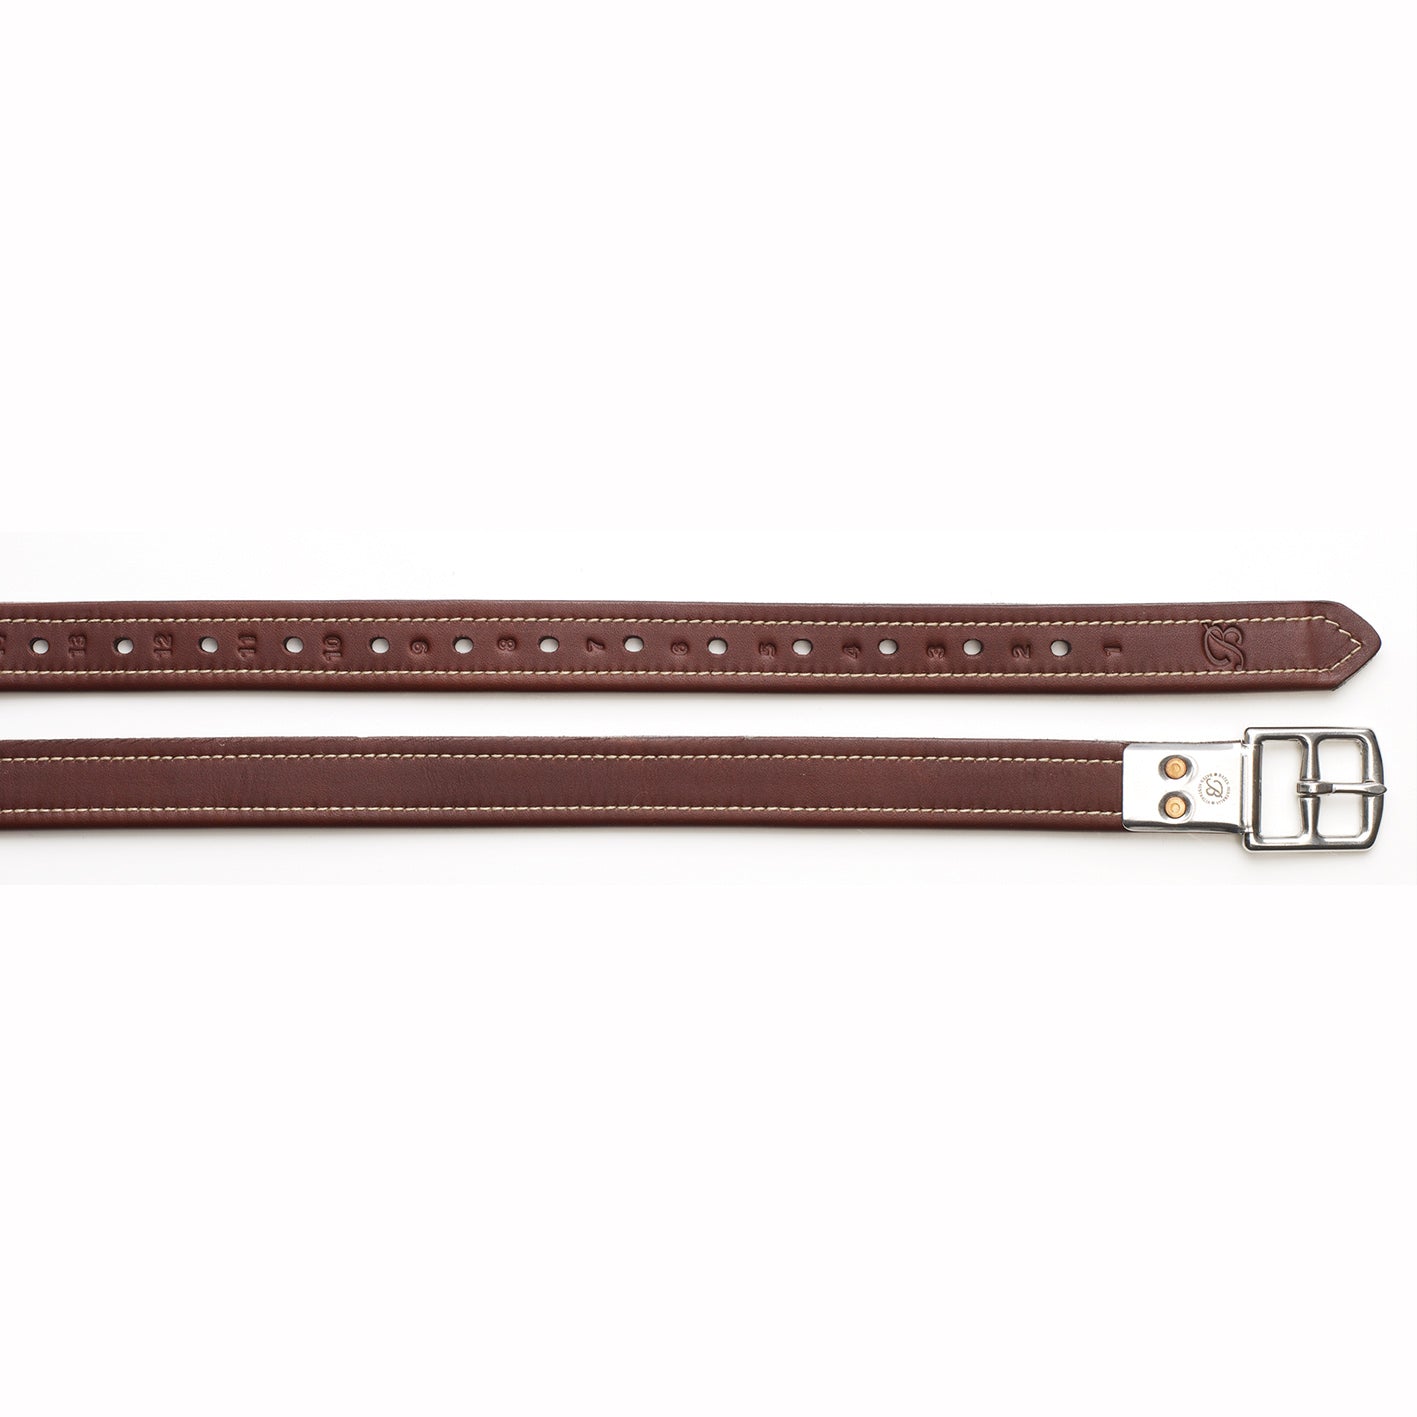 Bates Stirrup Leathers with Contrast Stitching